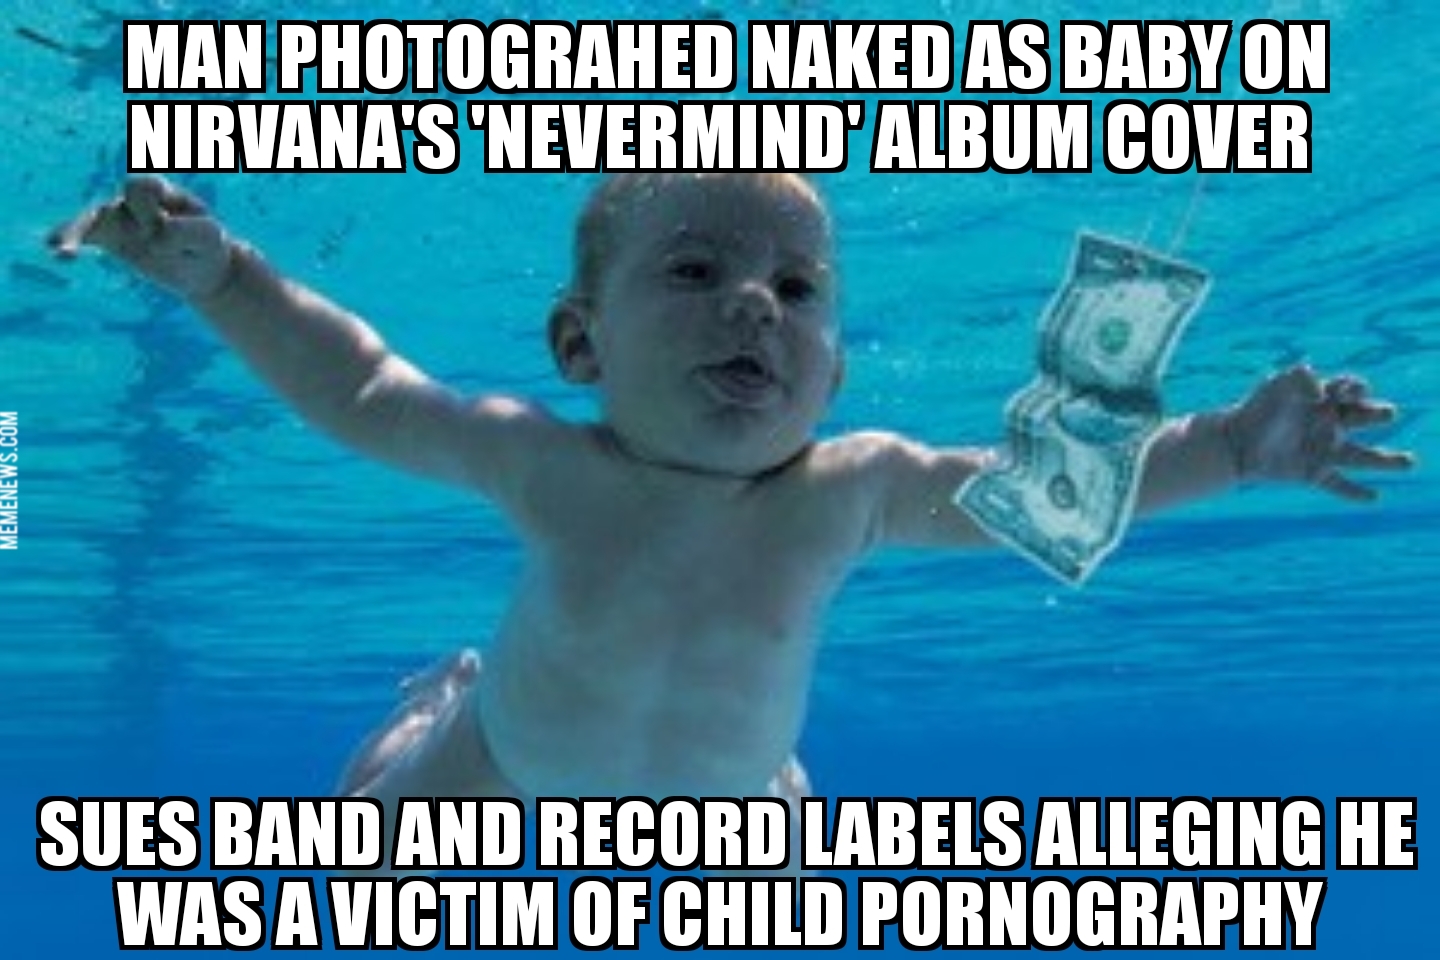 Man sues over ‘Nevermind’ cover